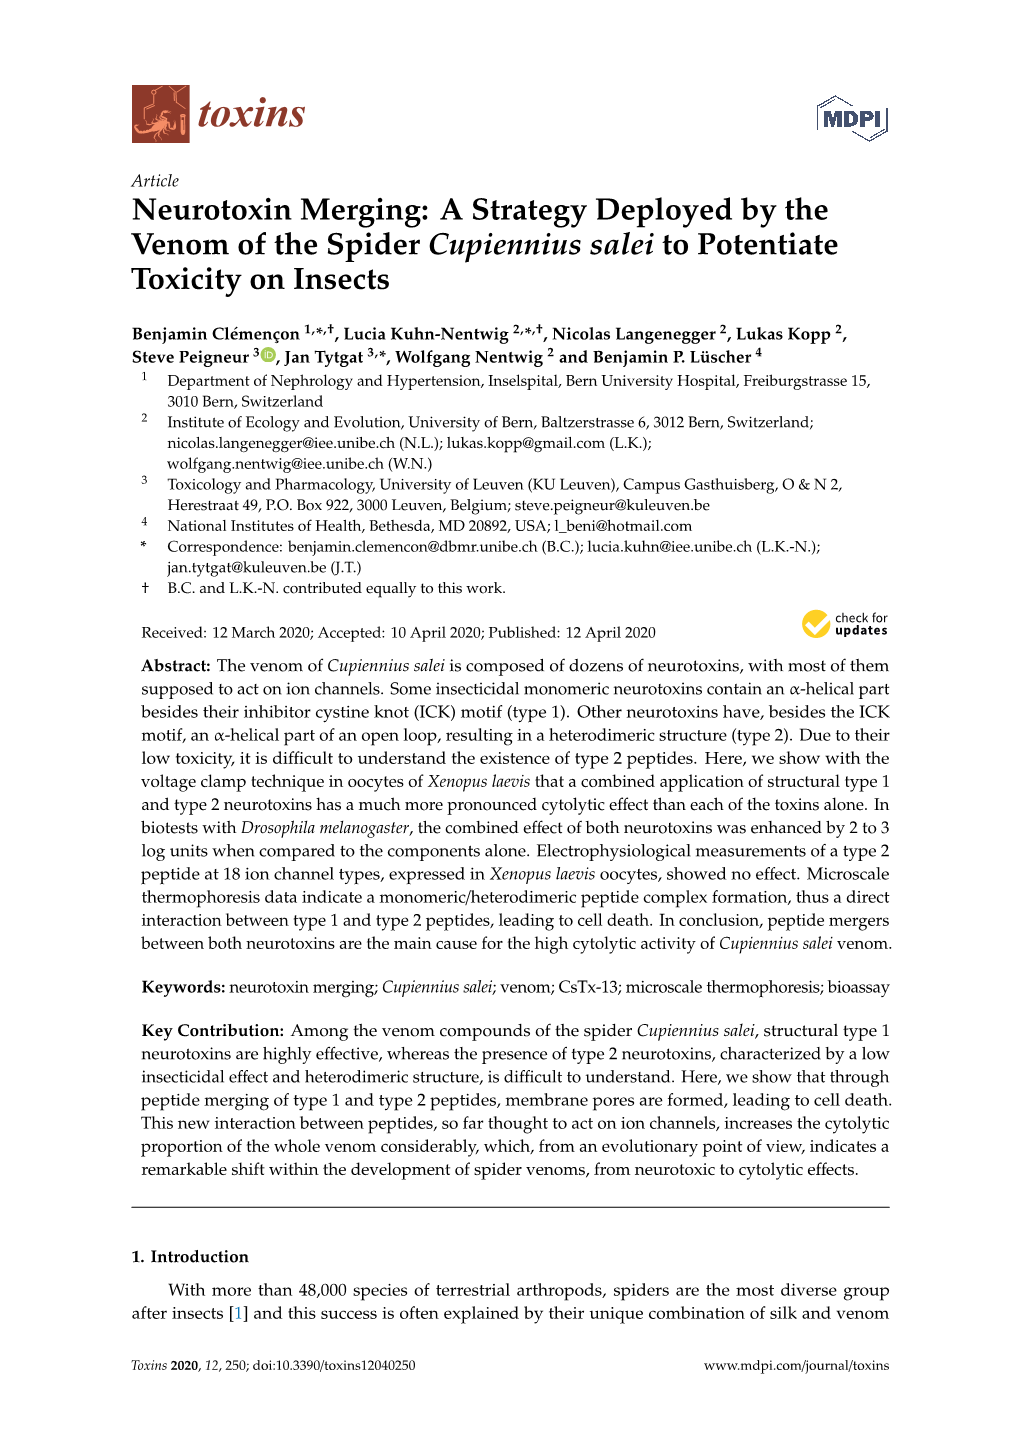 Neurotoxin Merging: a Strategy Deployed by the Venom of the Spider Cupiennius Salei to Potentiate Toxicity on Insects